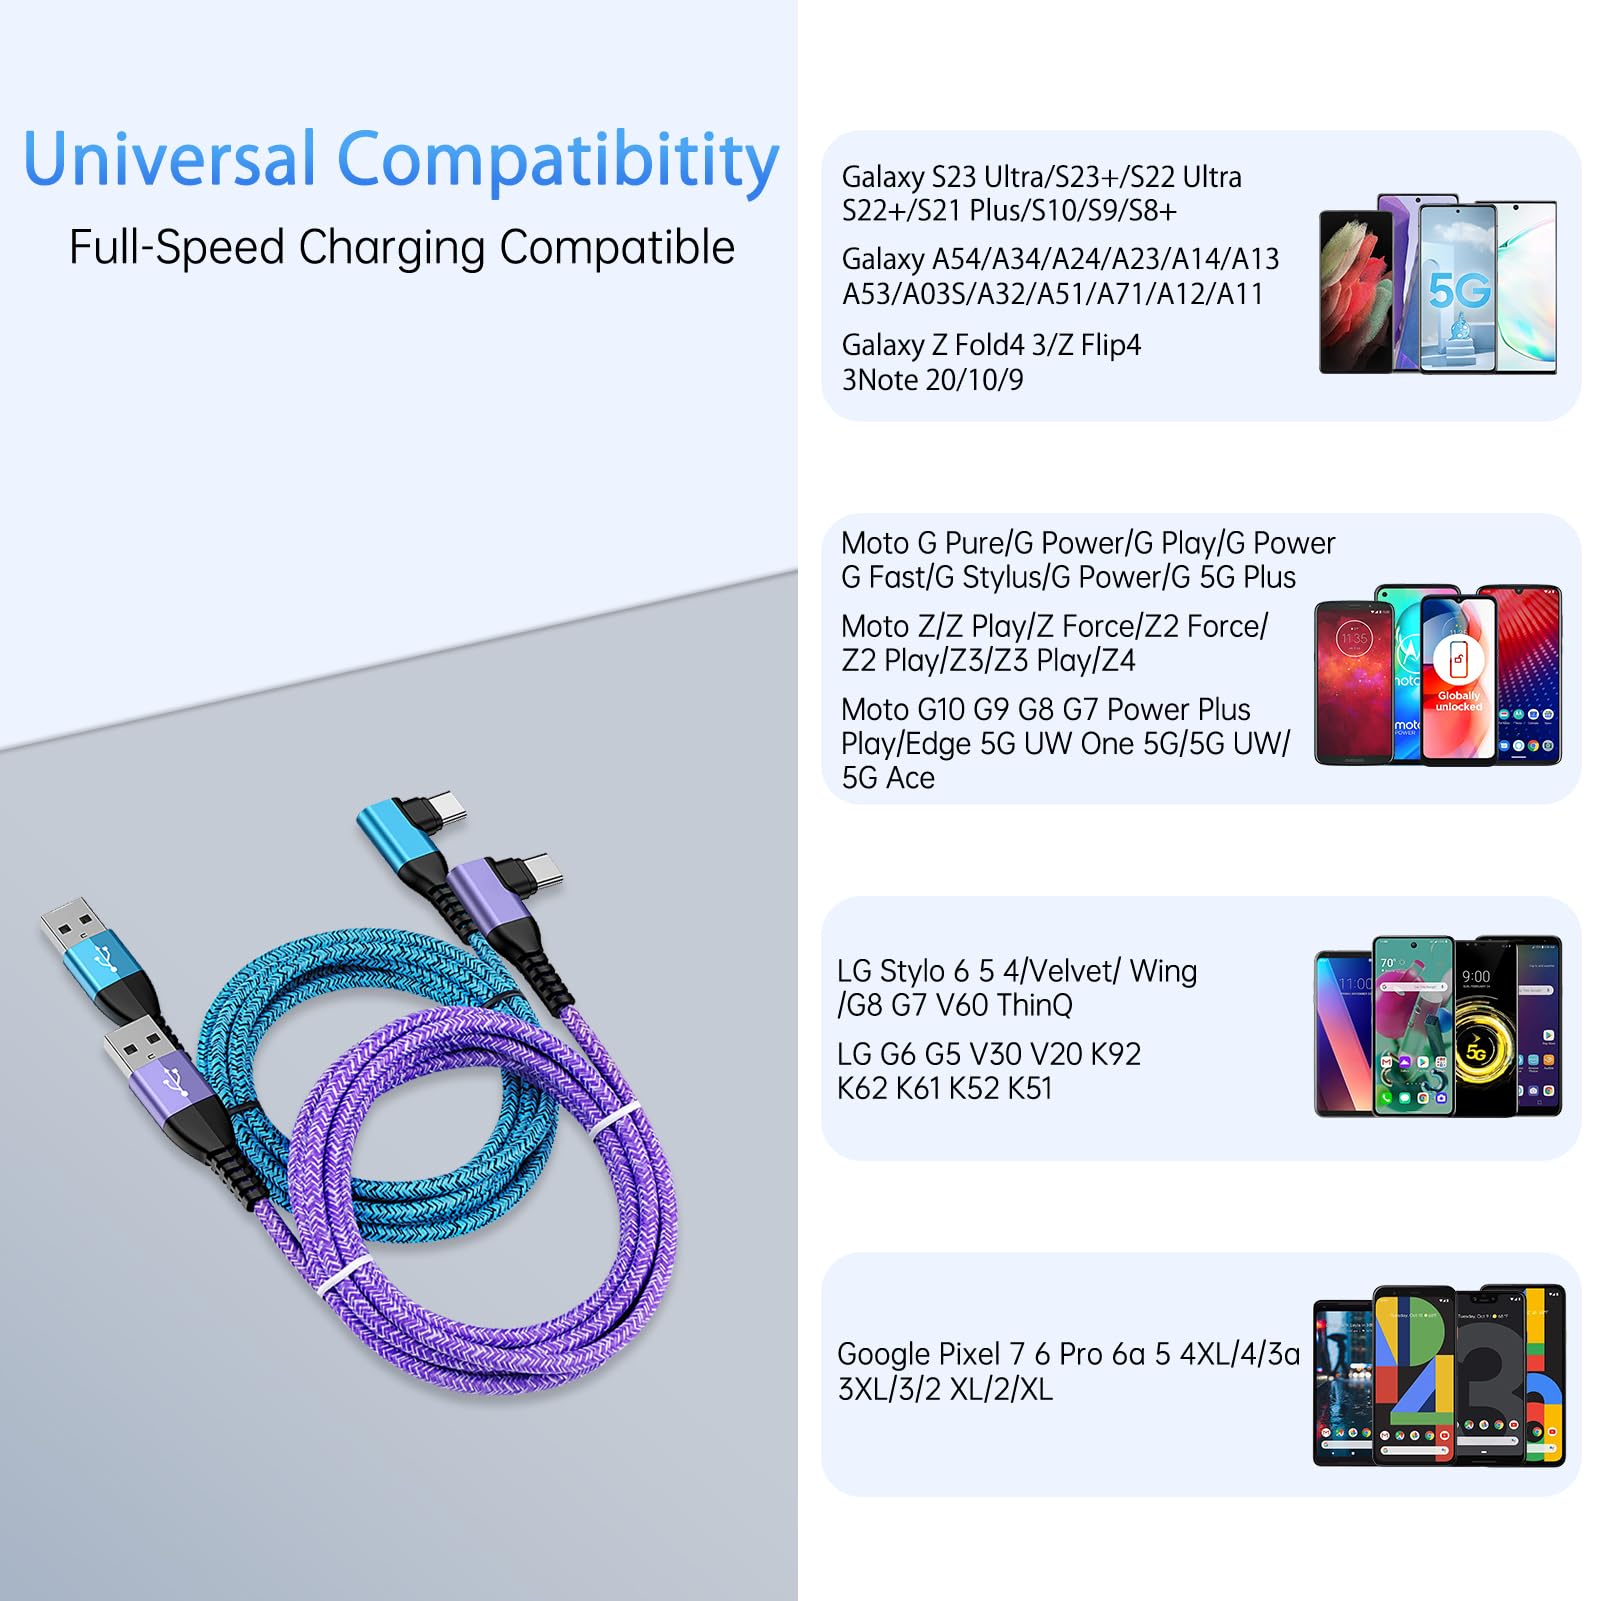 Car Android Auto USB C Cable Right Angle Type C Fast Charger C Cord USB A to USB C Charger Cable 90 Degree Fast Charging for Samsung Galaxy A23/A54/A14/A53/A13/A03S/A24/A34/S23 Ultra/S22 Ultra/S21/S10